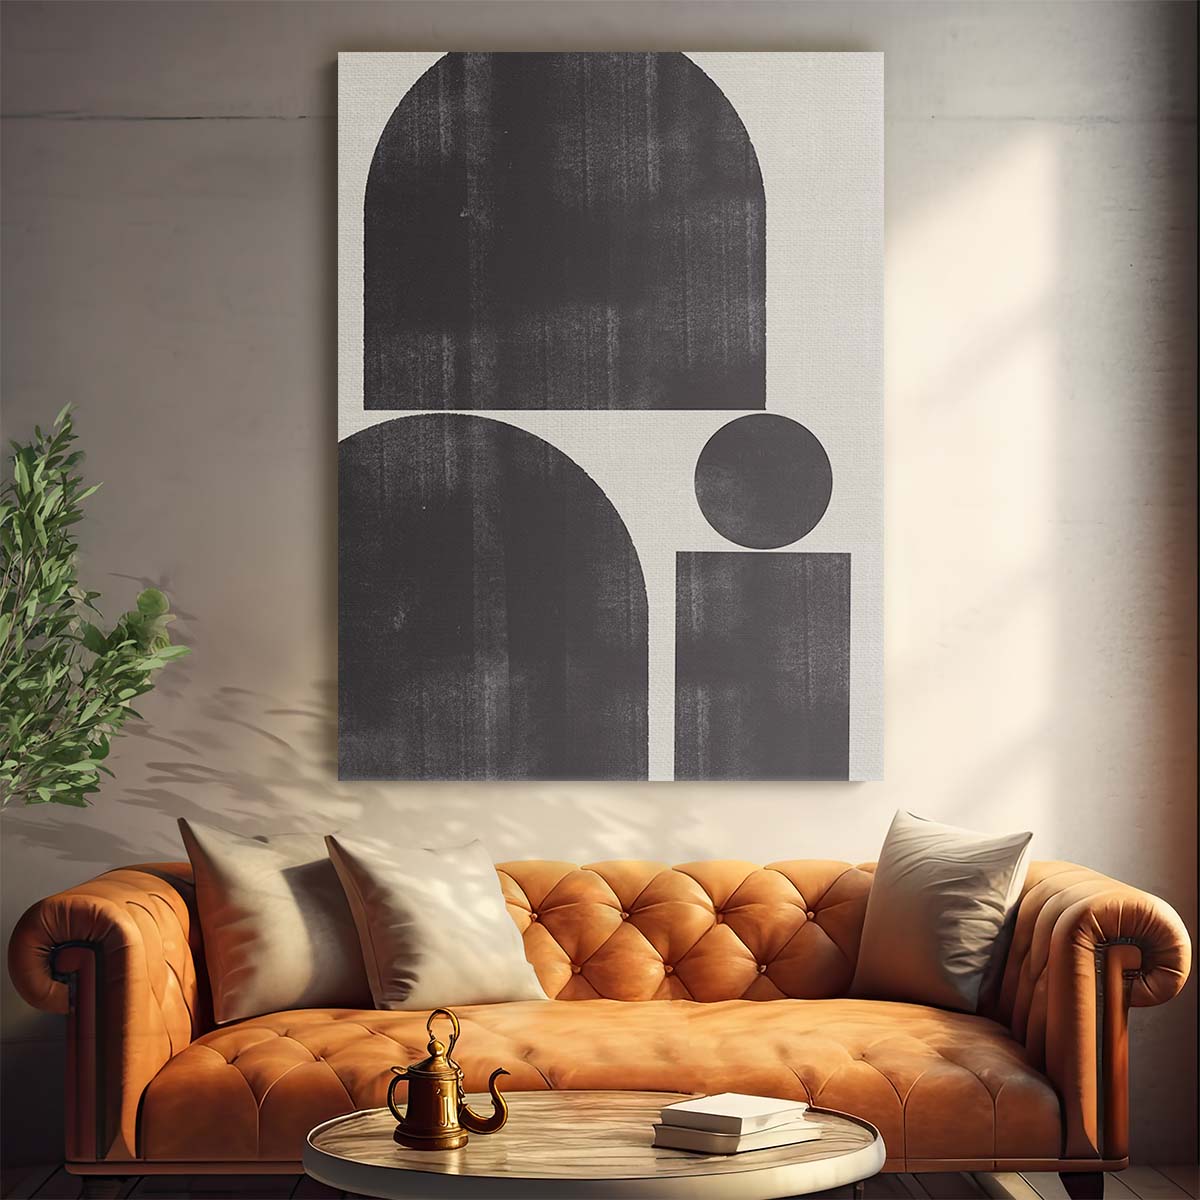 Abstract Geometric Illustration Art, Shape Study No1 by MIUUS Studio by Luxuriance Designs, made in USA